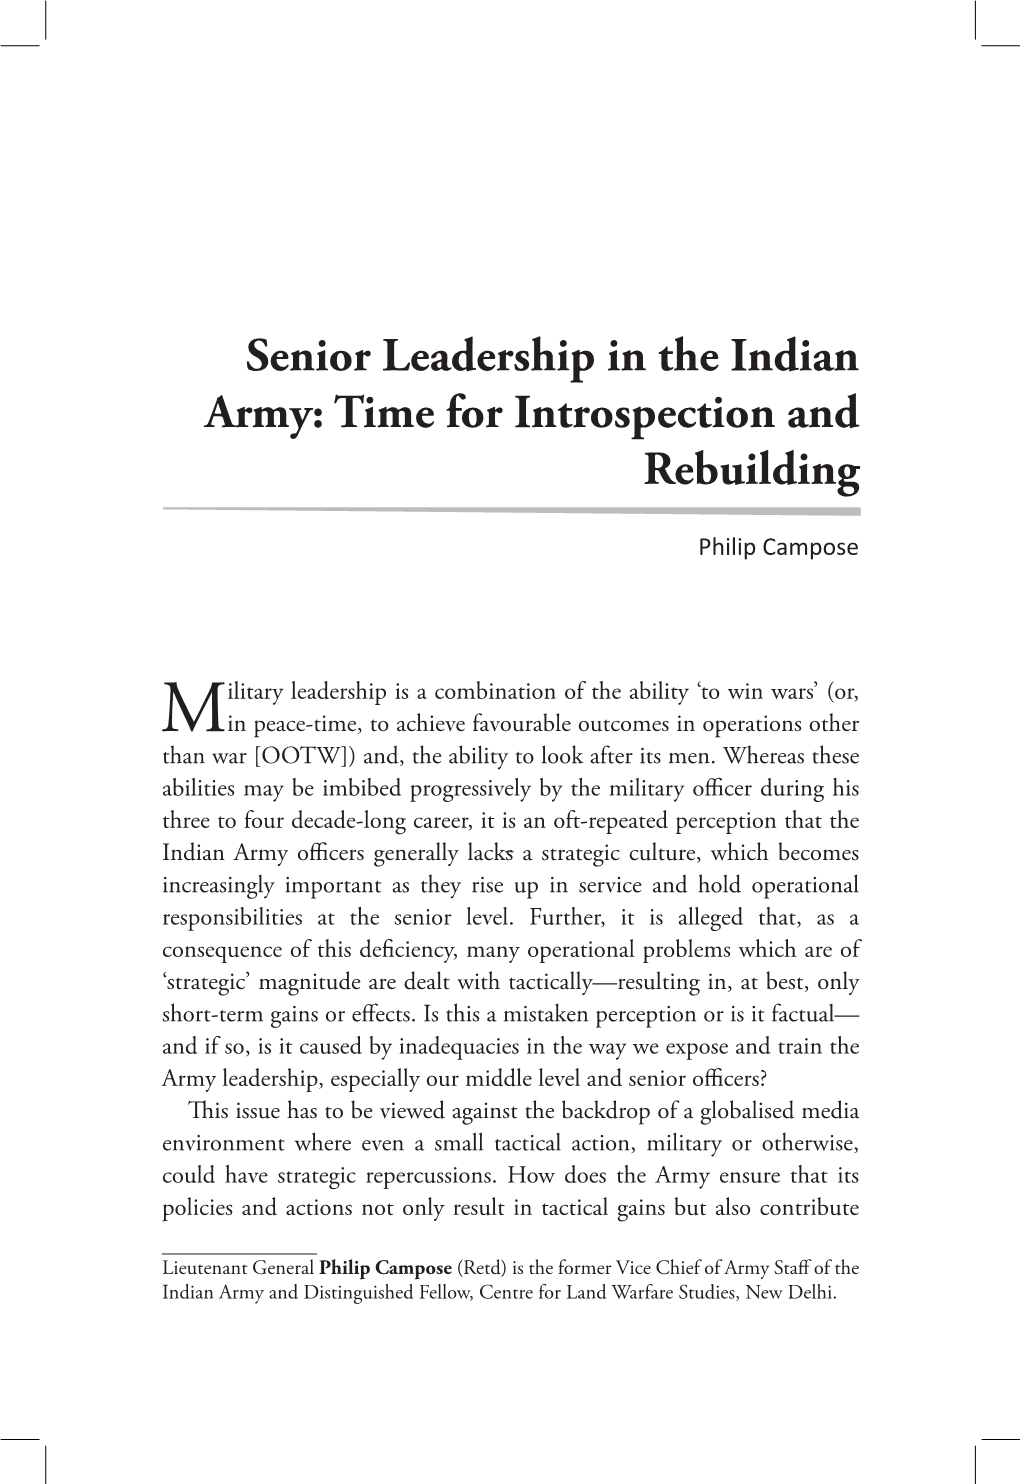 Senior Leadership in the Indian Army: Time for Introspection and Rebuilding